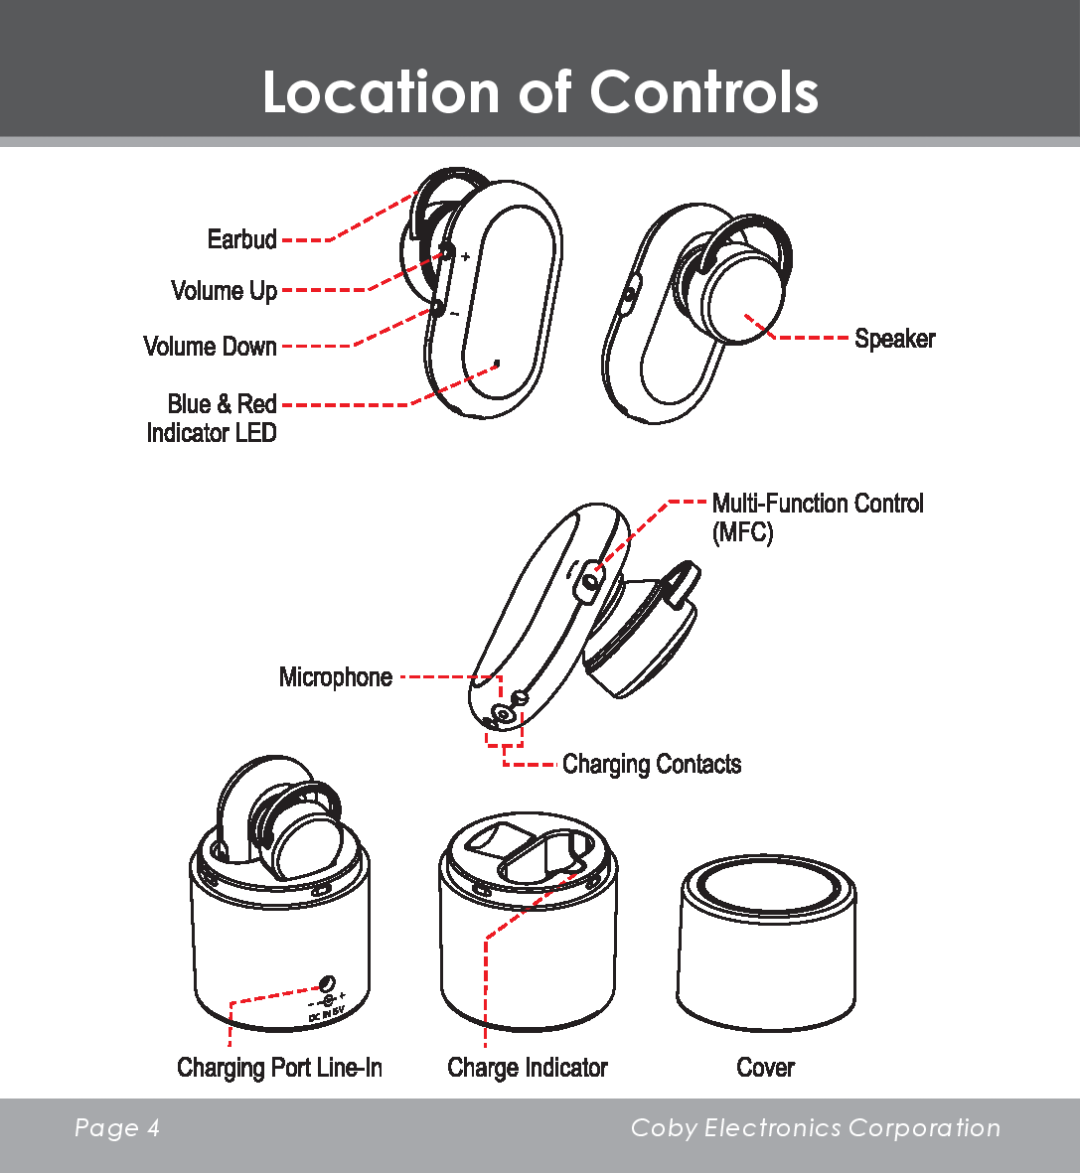 COBY electronic CV-M225 instruction manual Location of Controls, Page , Coby Electronics Corporation 